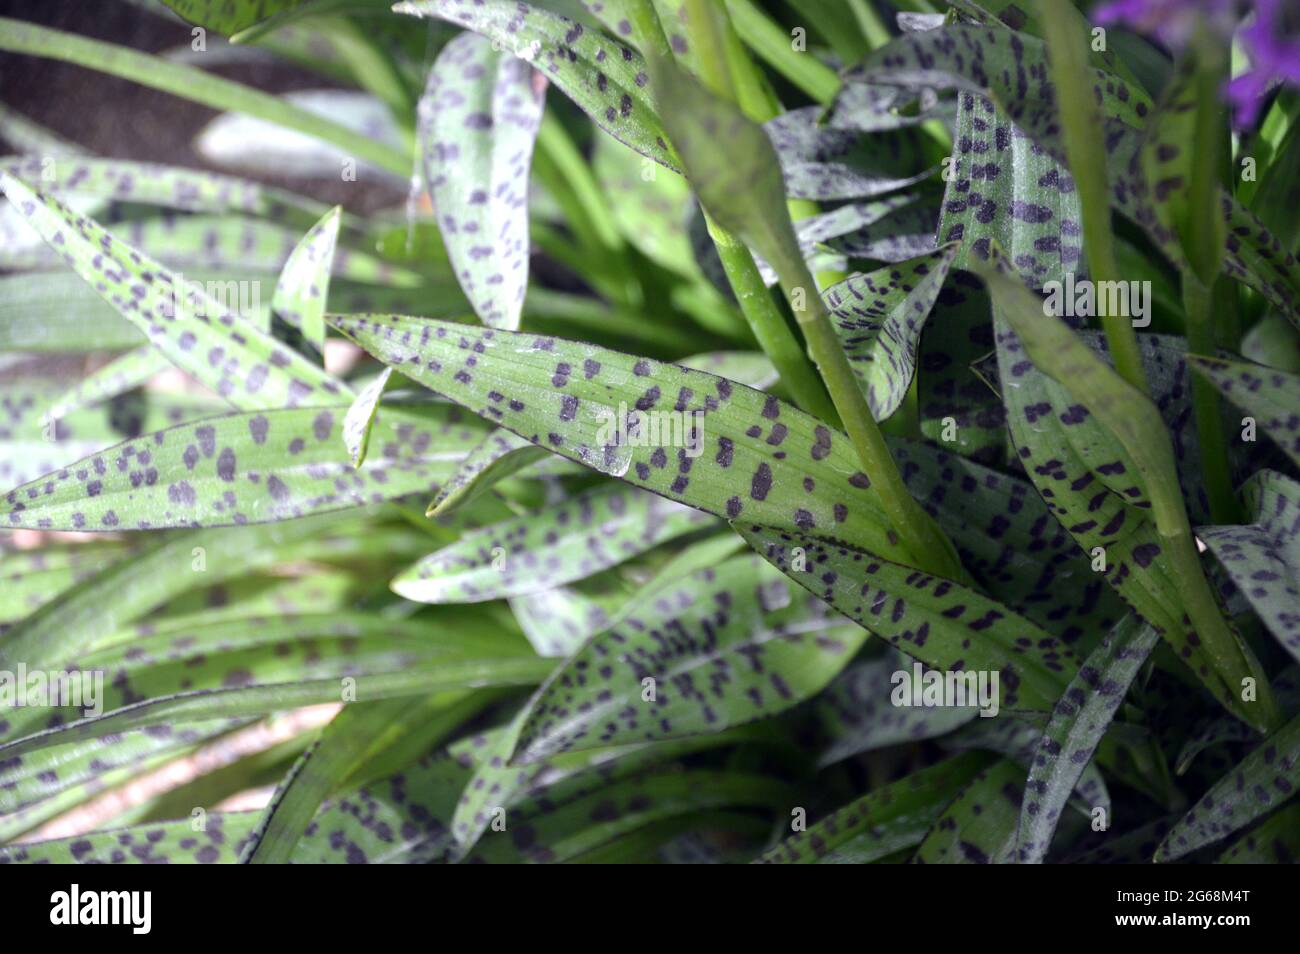 Common Spotted Orchid 'Dactylorhiza fuchsii' Leaves Grown in the Alpine House at RHS Garden Harlow Carr, Harrogate, Yorkshire, UK. Stock Photo